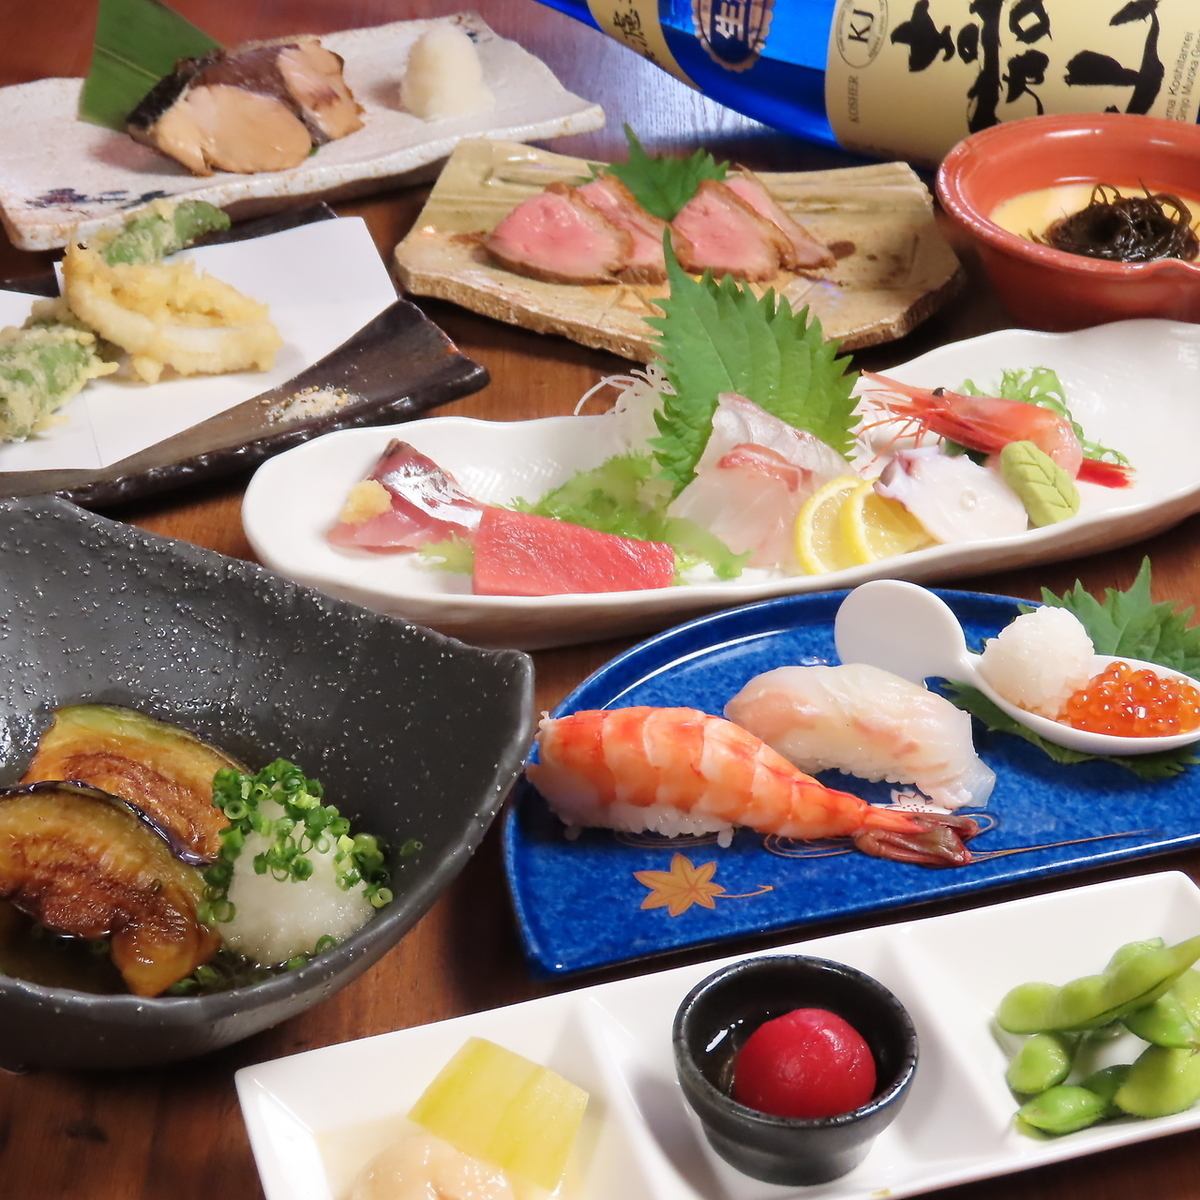 A popular restaurant where you can enjoy authentic nigiri sushi, Niigata specialties, and fresh fish all at once